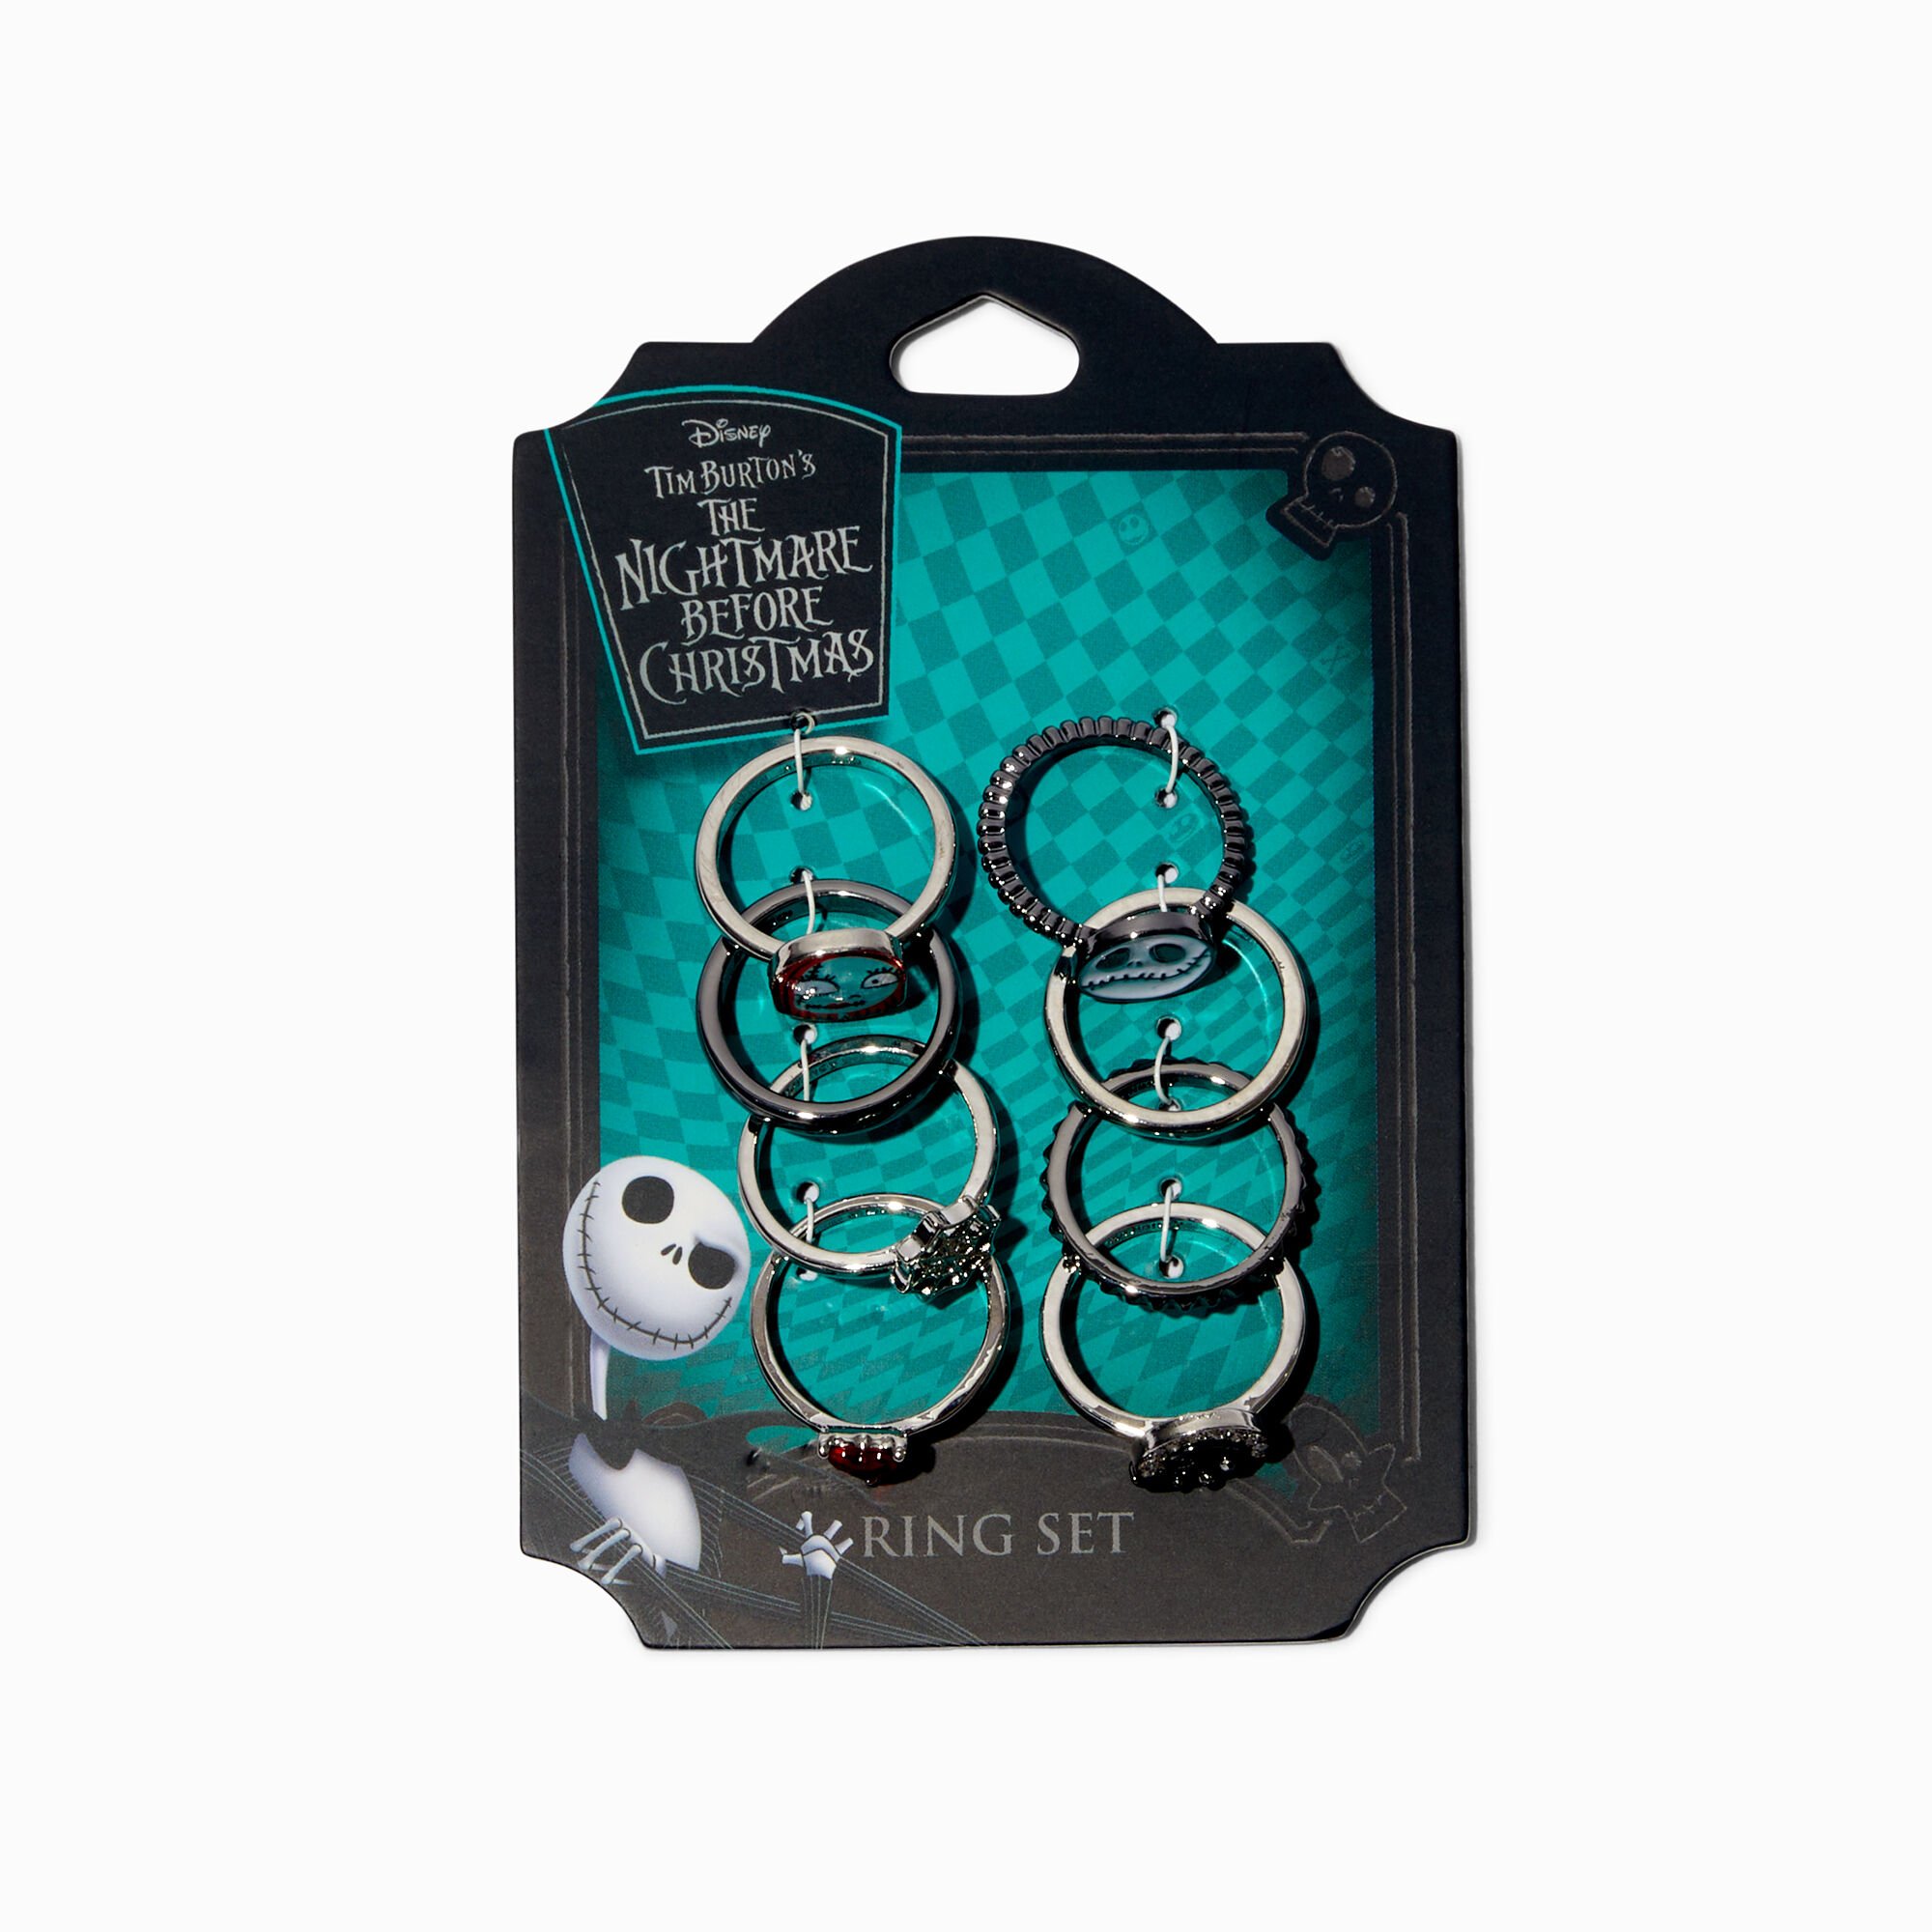 View Claires The Nightmare Before Christmas Ring Set 6 Pack information